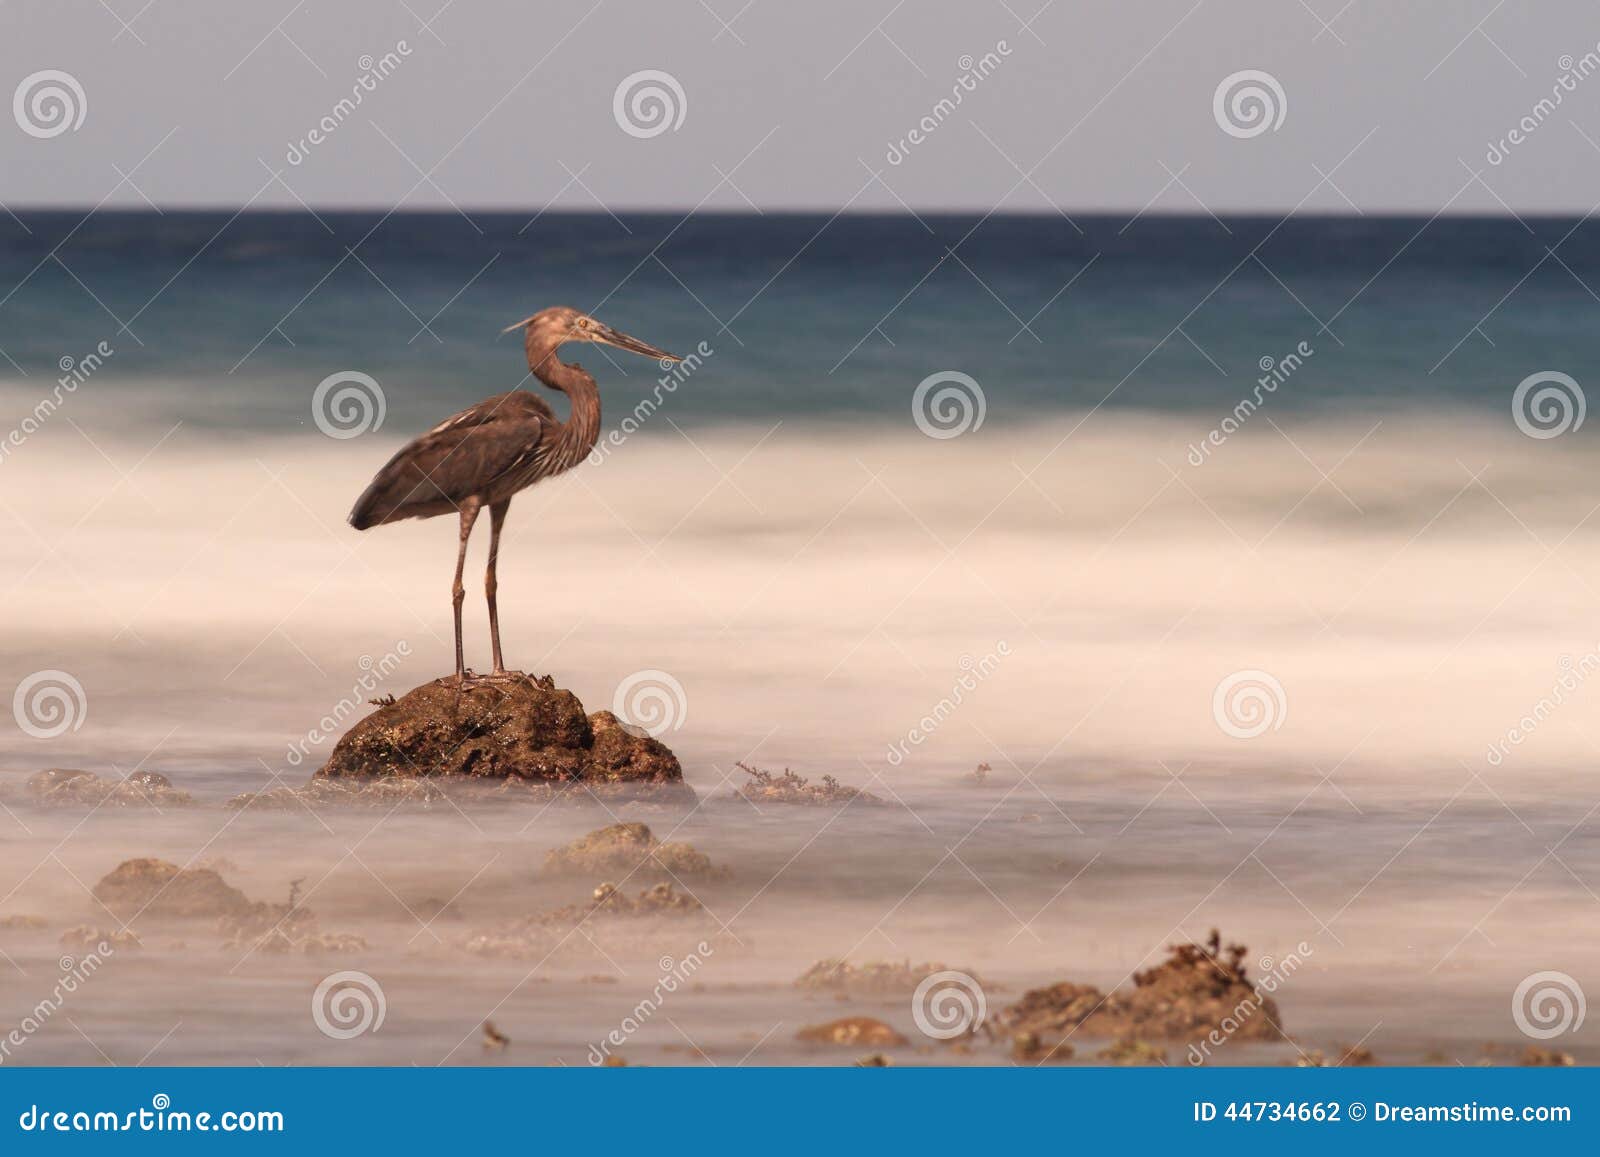 heron on rock looks out to blurry sea, sulawesi.